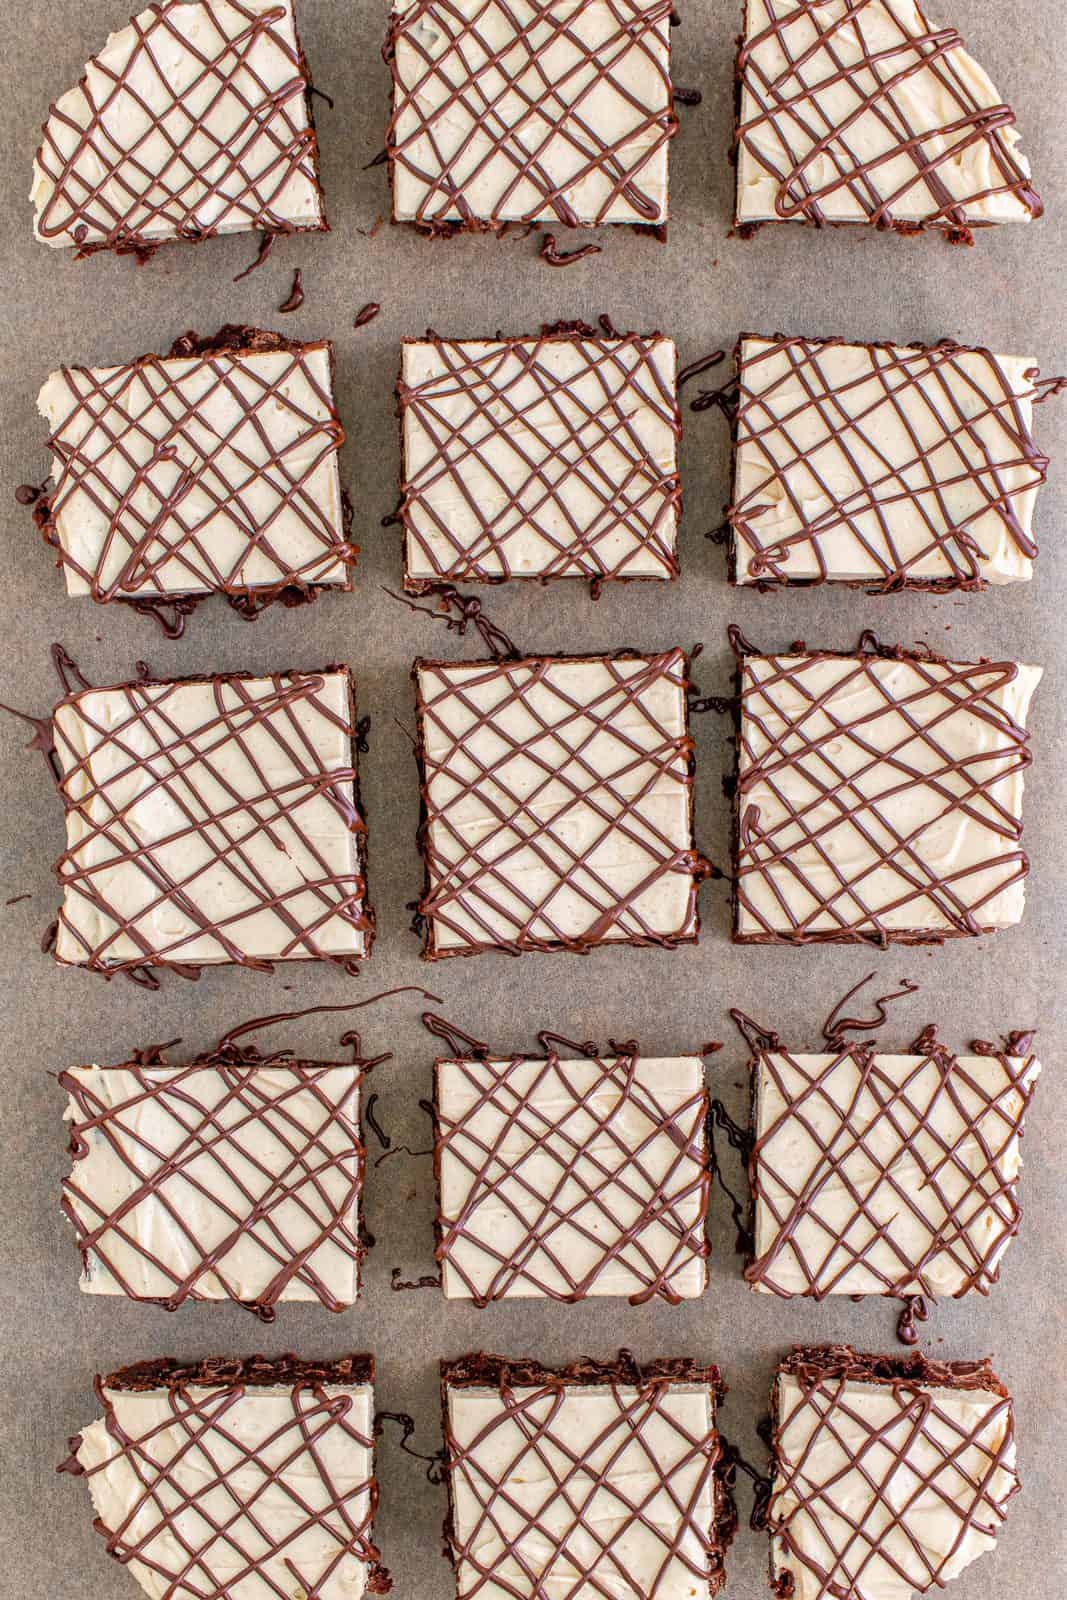 Brownie cut and drizzled with chocolate.